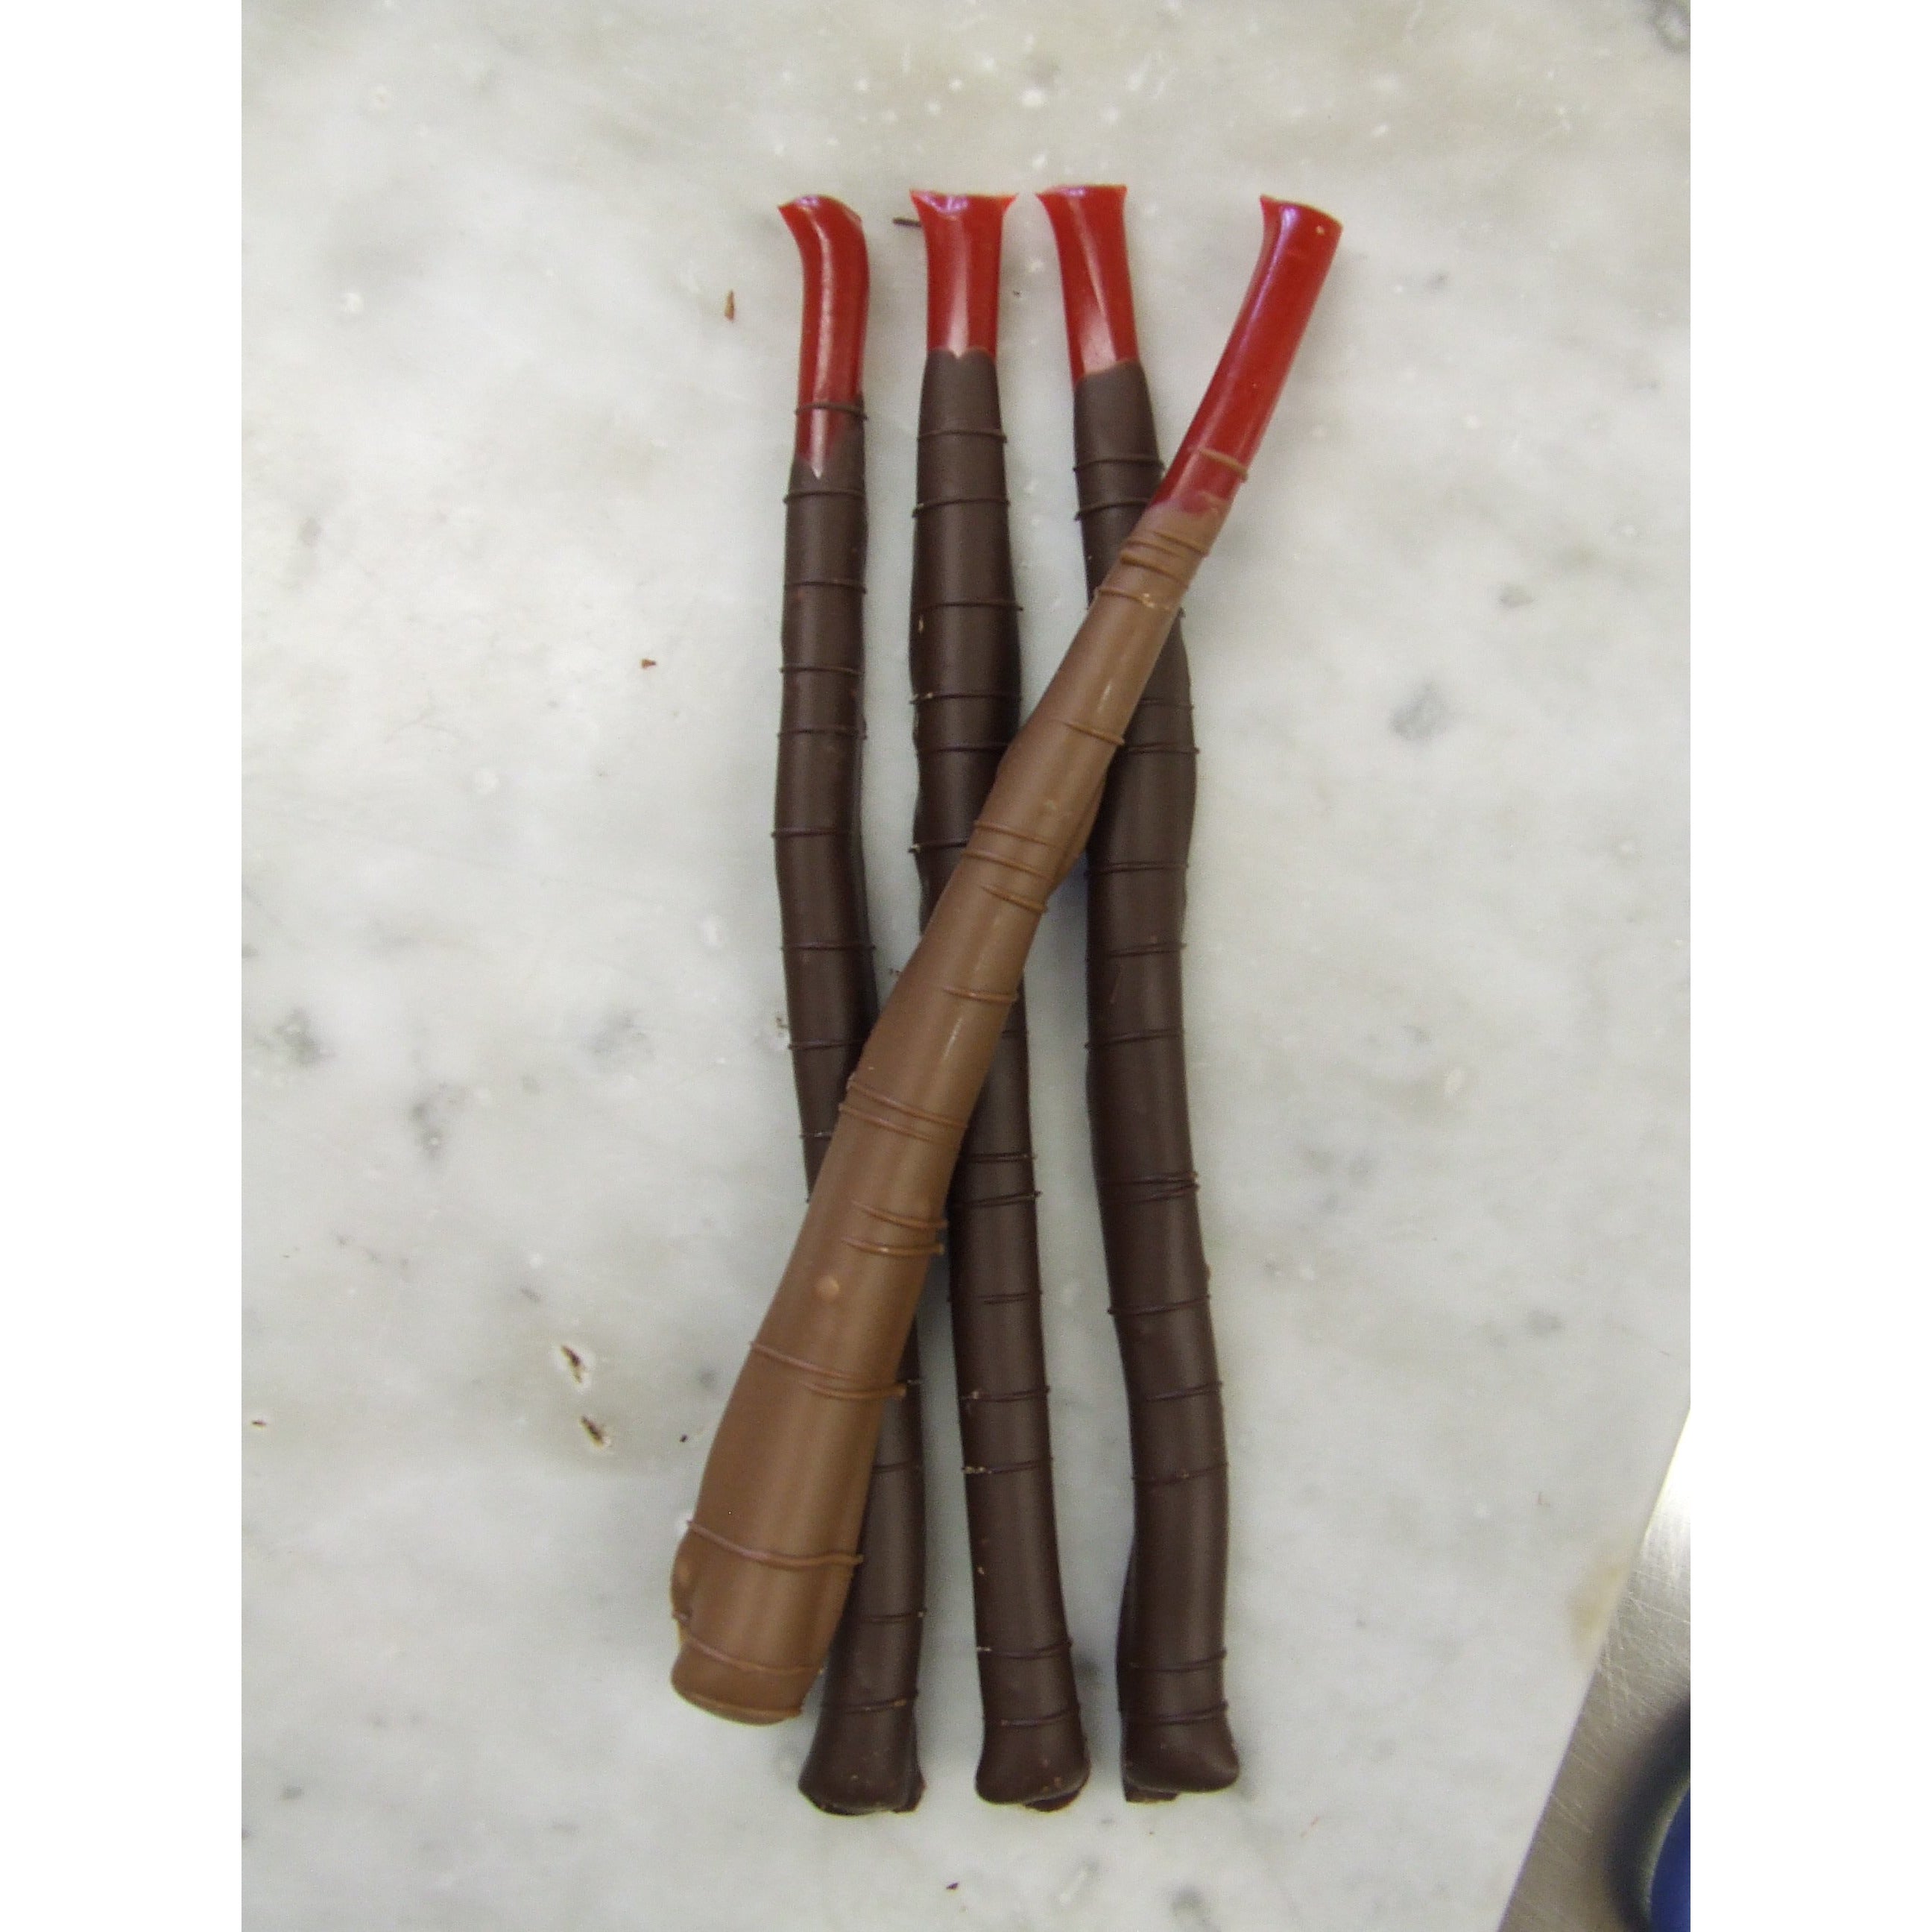 Chelsea Chocolate Dipped Red Licorice